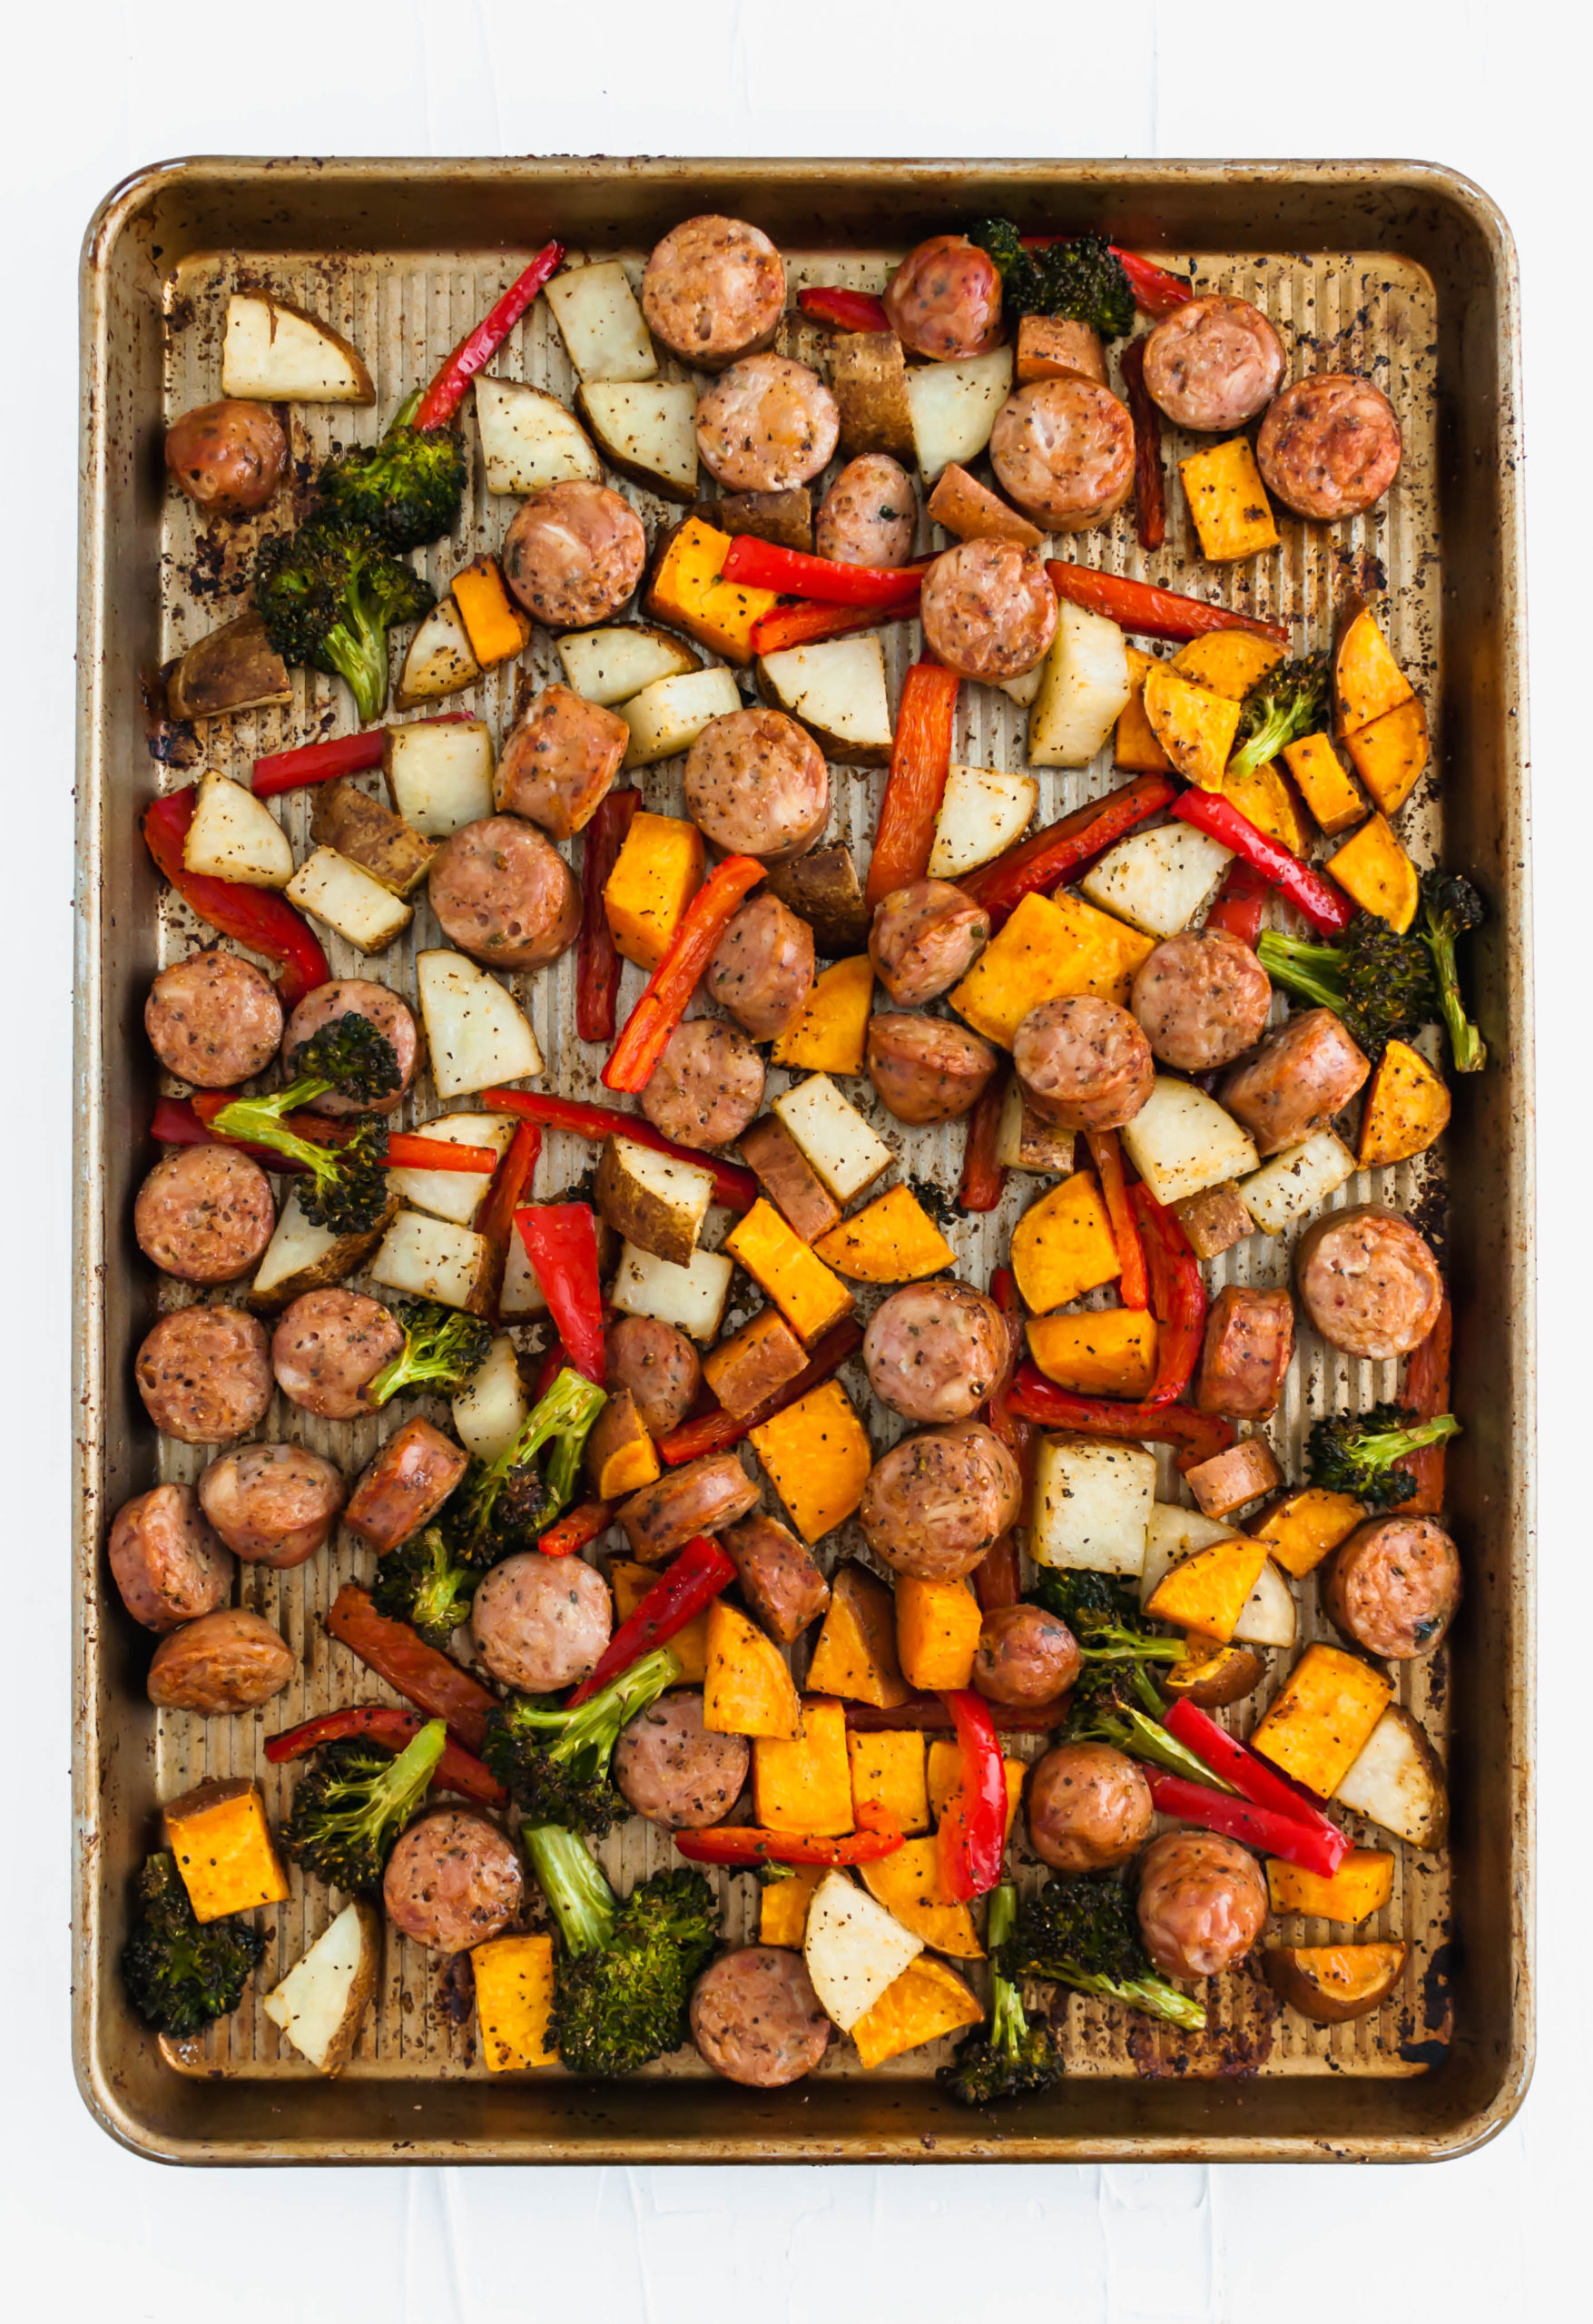 Looking for an easy weeknight meal?! This Sheet Pan Sausage and Vegetables is simple to prepare and done in less than 30 minutes.